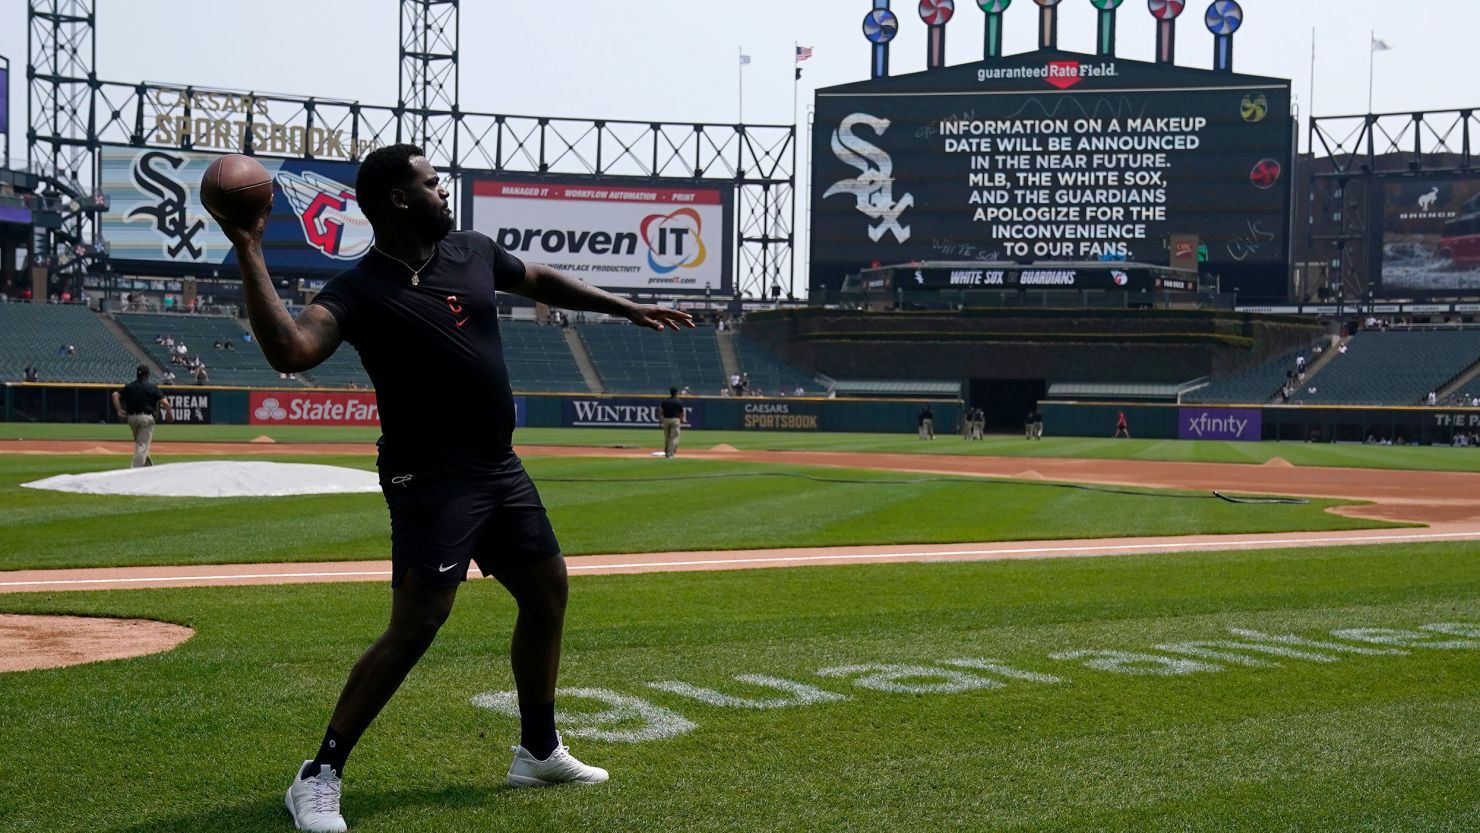 Cleveland Guardians' player Franmil Reyes throws a football to teammate Myles Straw at Guaranteed Rate Field in Chicago on Wednesday.